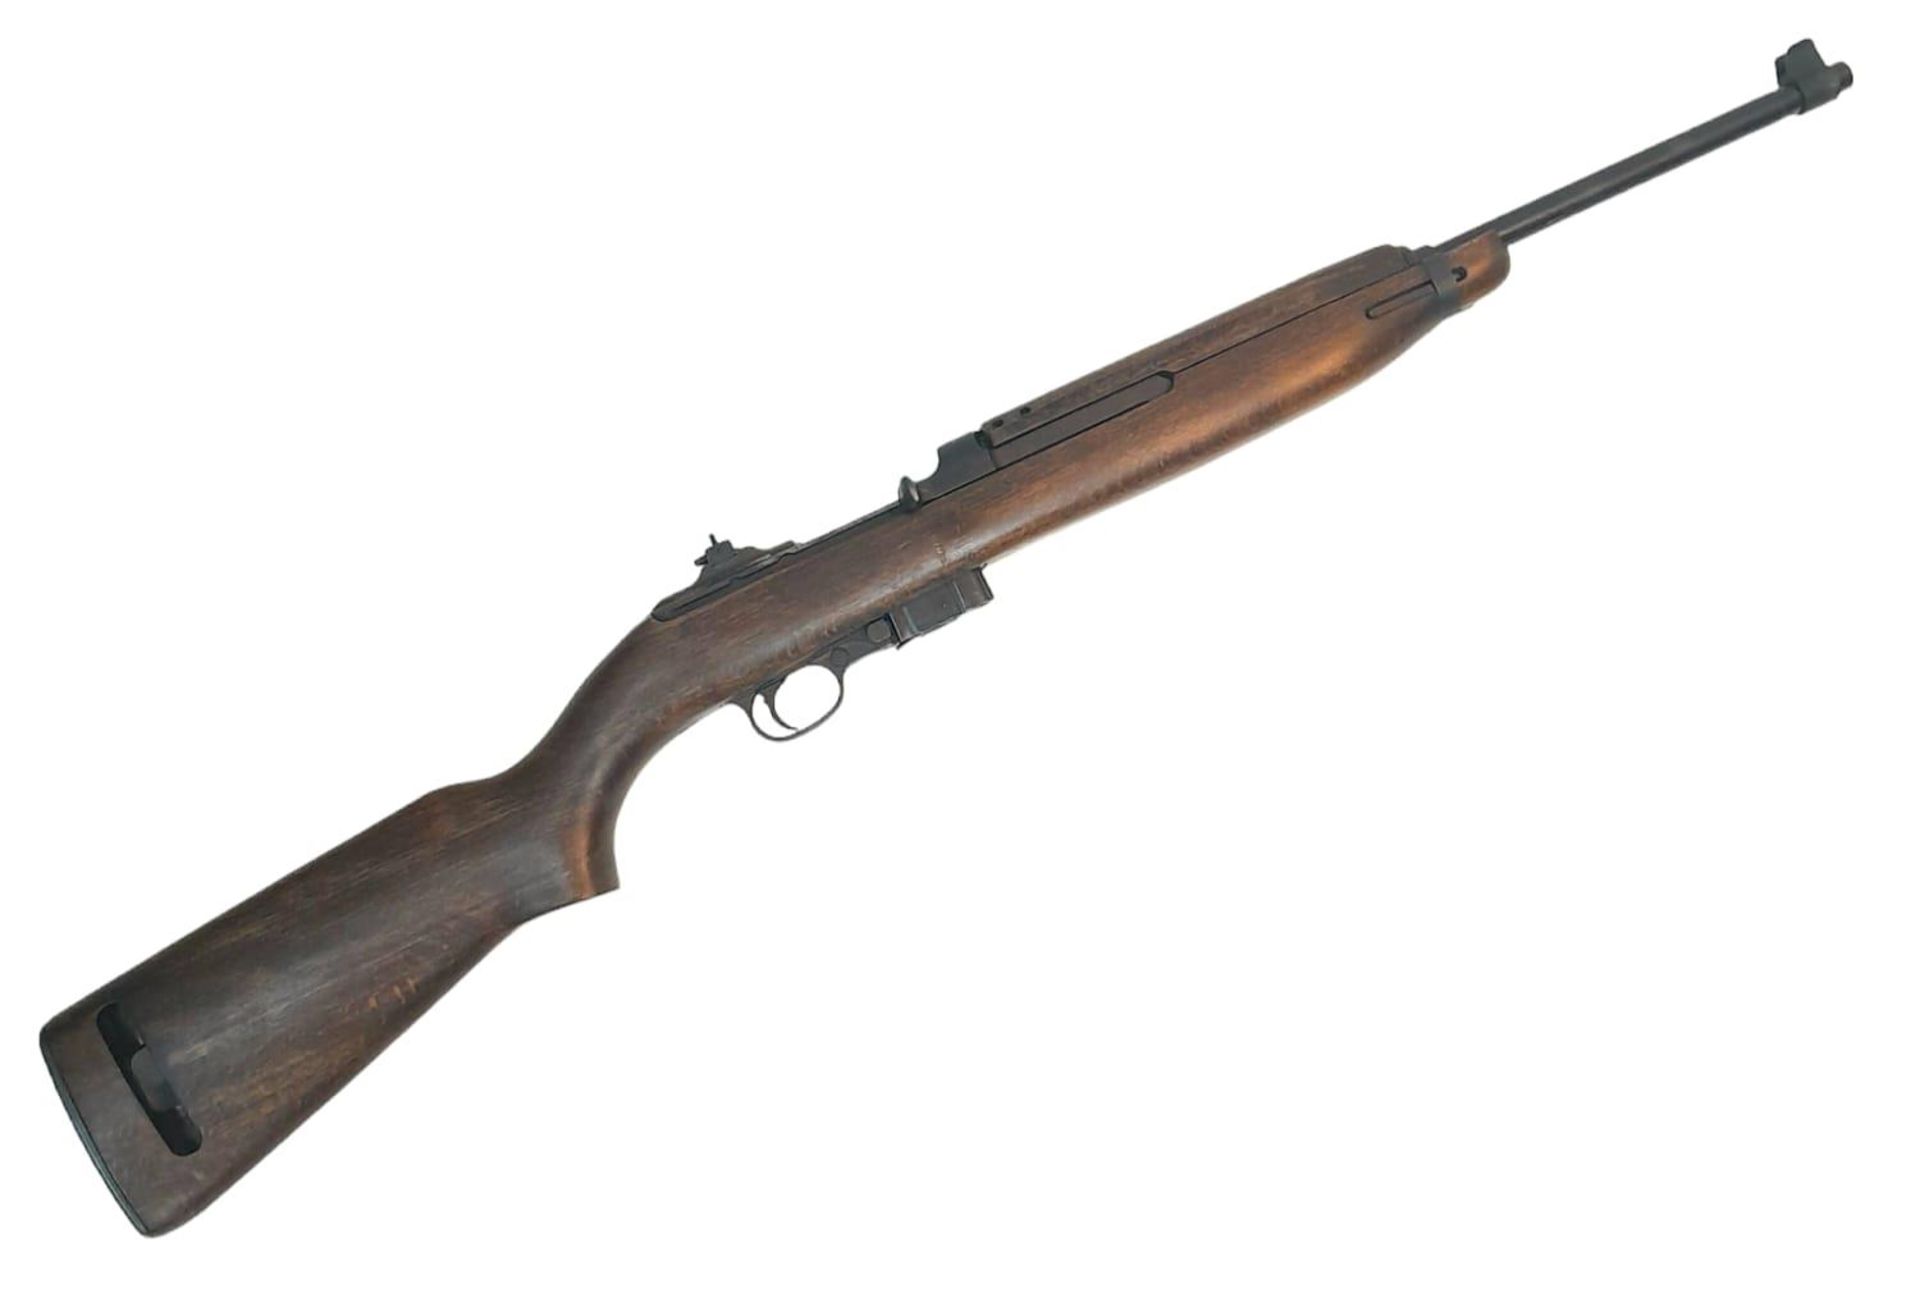 A Deactivated Winchester M1 Carbine Self Loading Rifle. Used by the USA in warfare from 1942-73 this - Bild 2 aus 12